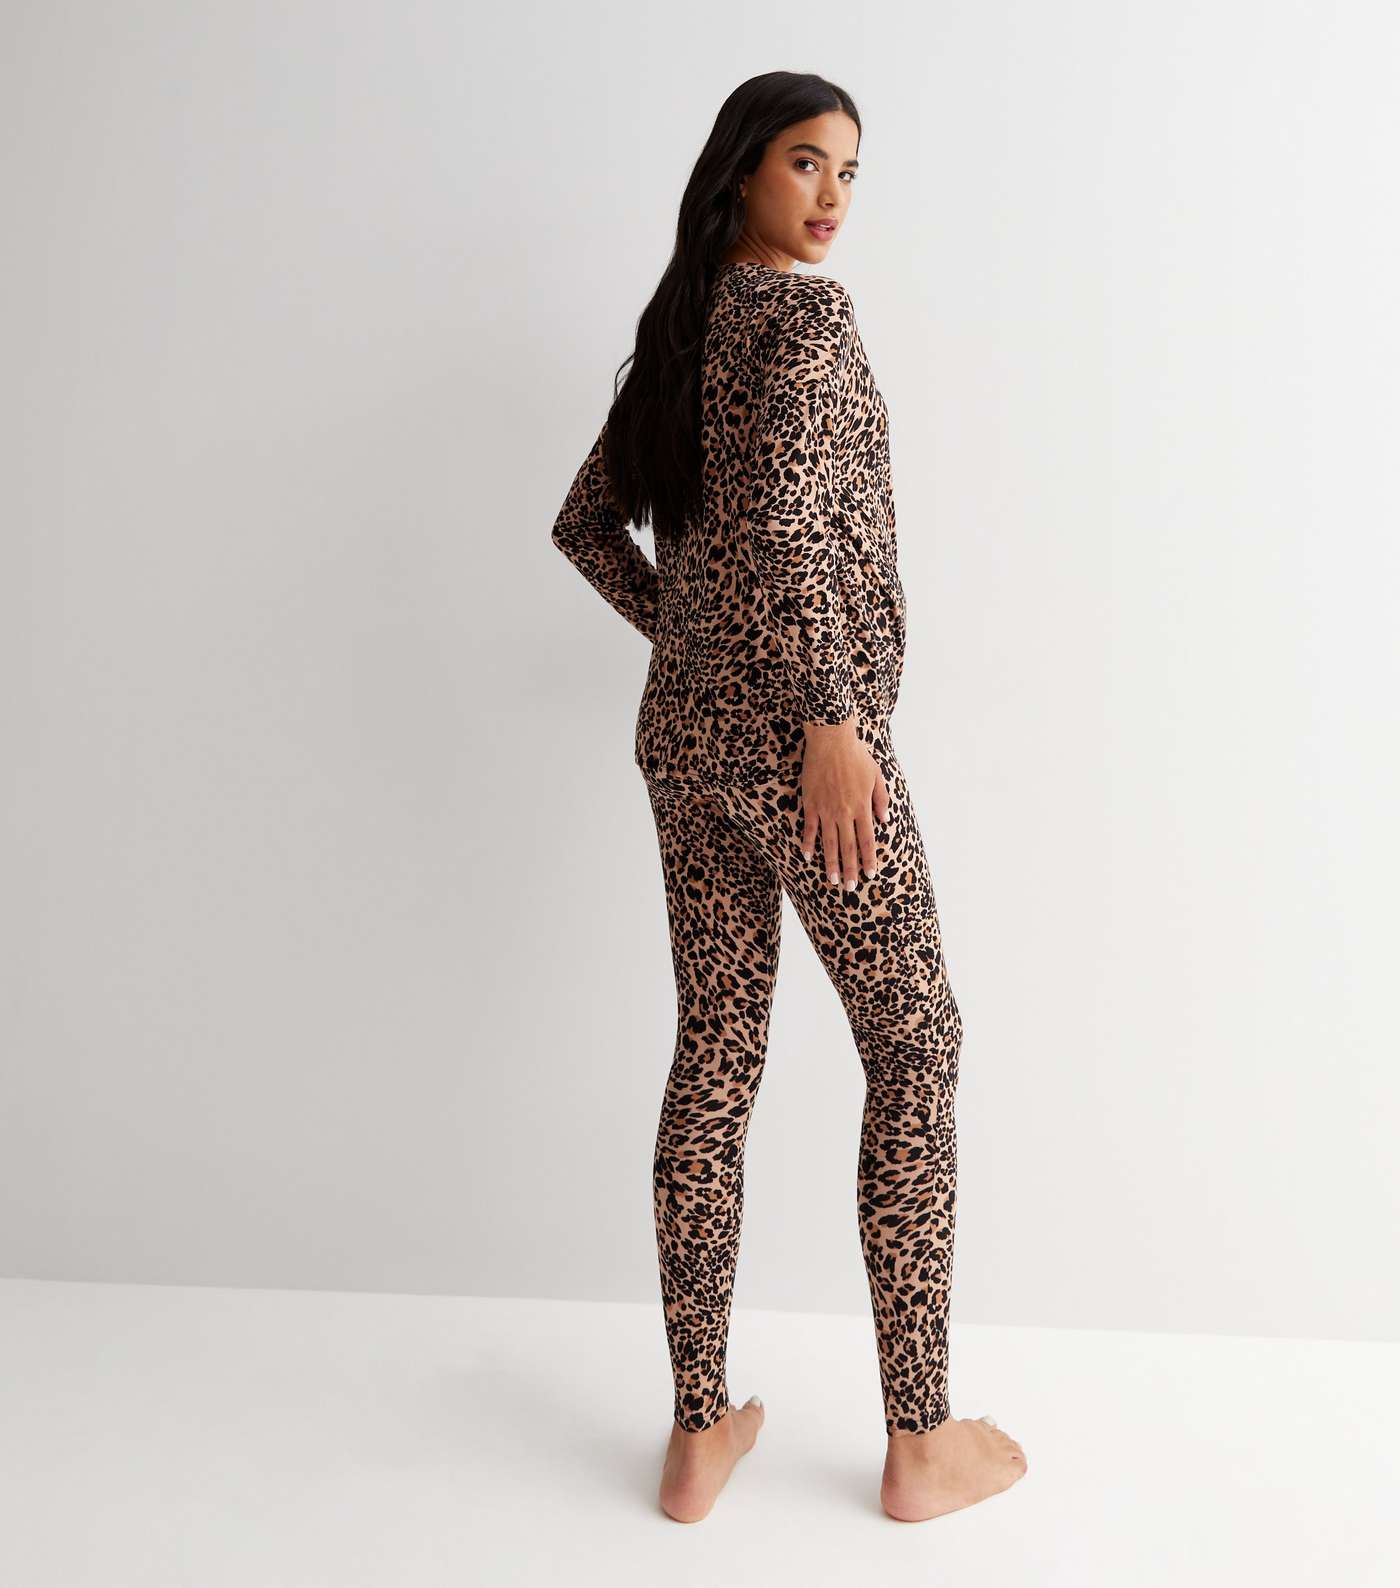 Maternity Brown Soft Touch Legging Pyjama Set with Leopard Print Image 4